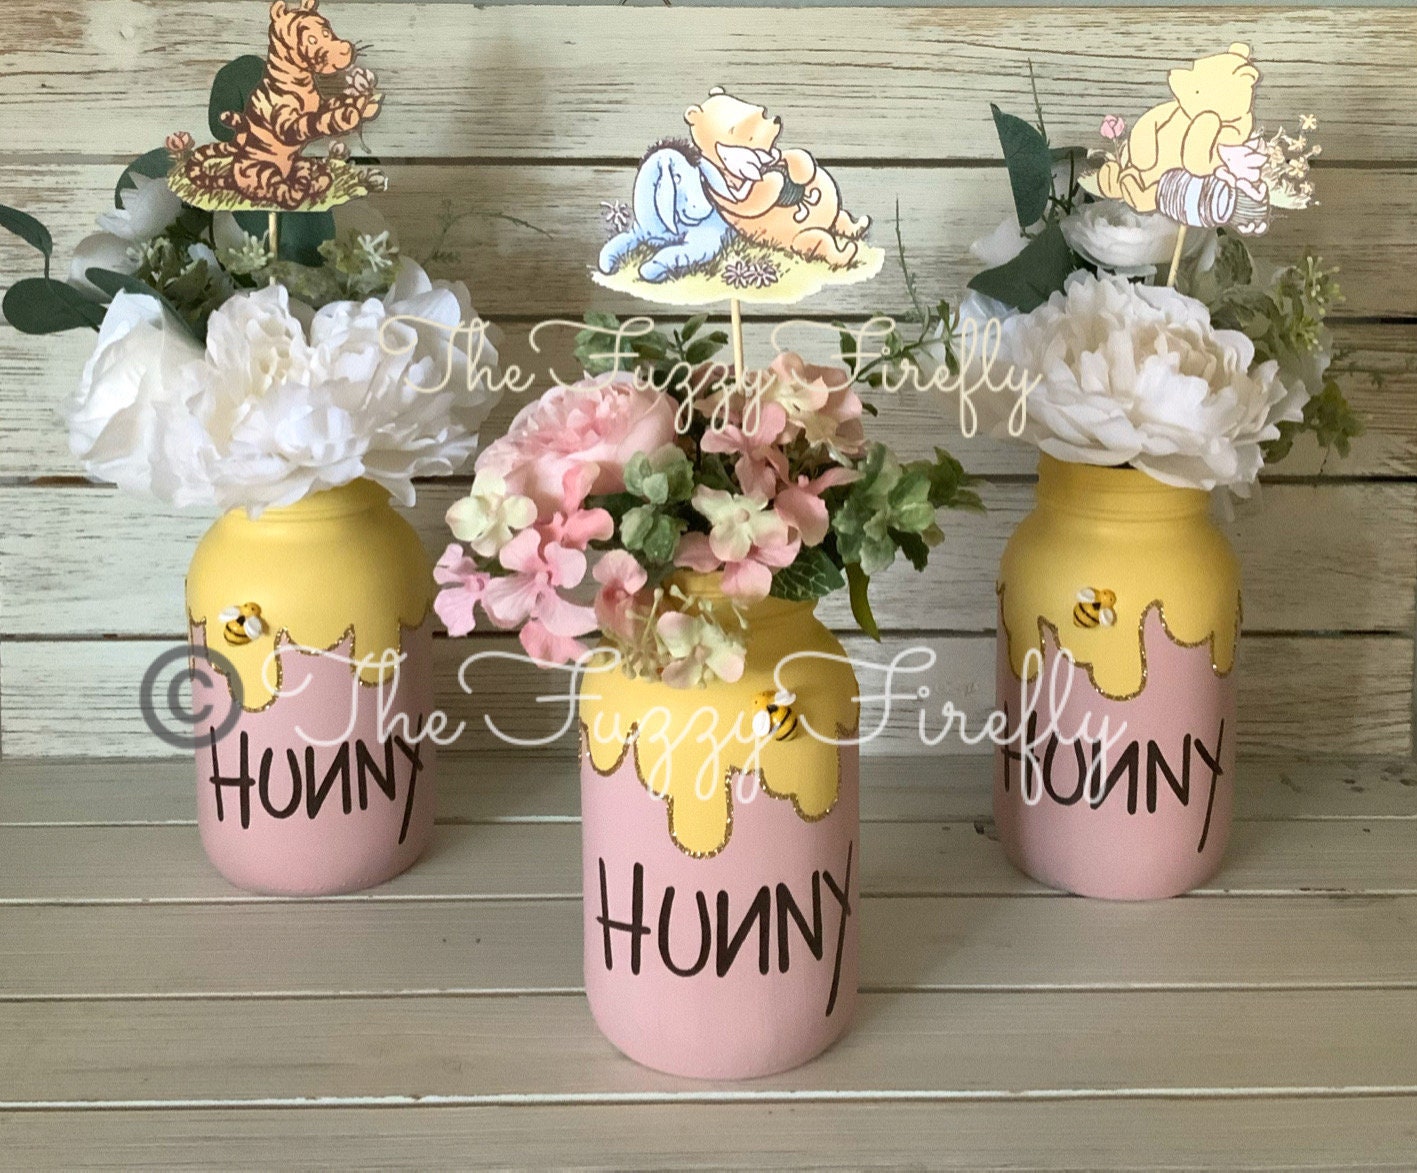 Winnie the pooh centerpieces for a baby shower for a client 🍯🤩 #baby, Center Piece Ideas